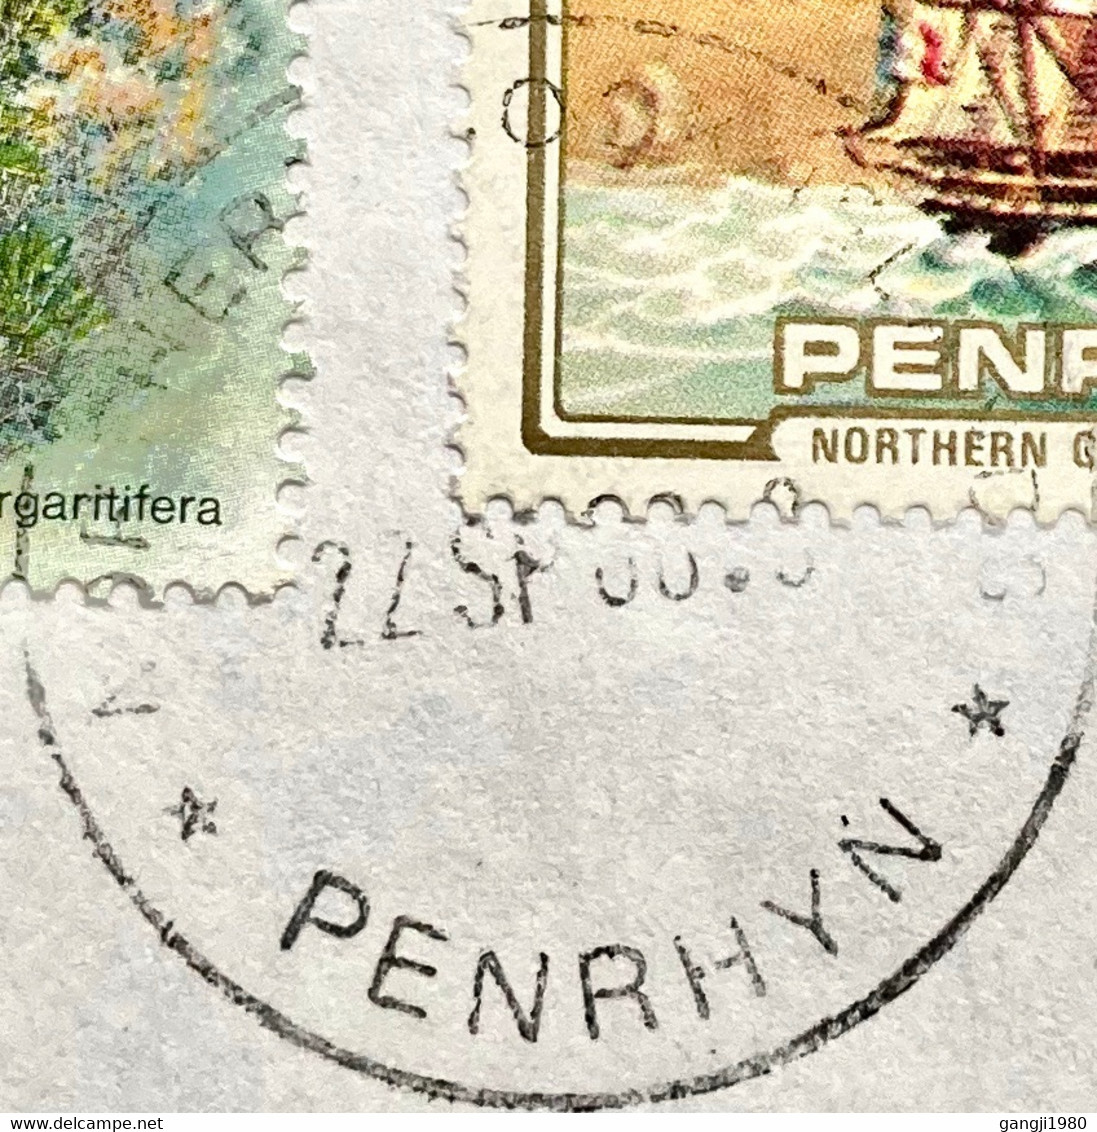 PENRHYN 2000, BLACK PEARL OYSTER,SHIP USED COVER TO INDIA - Penrhyn